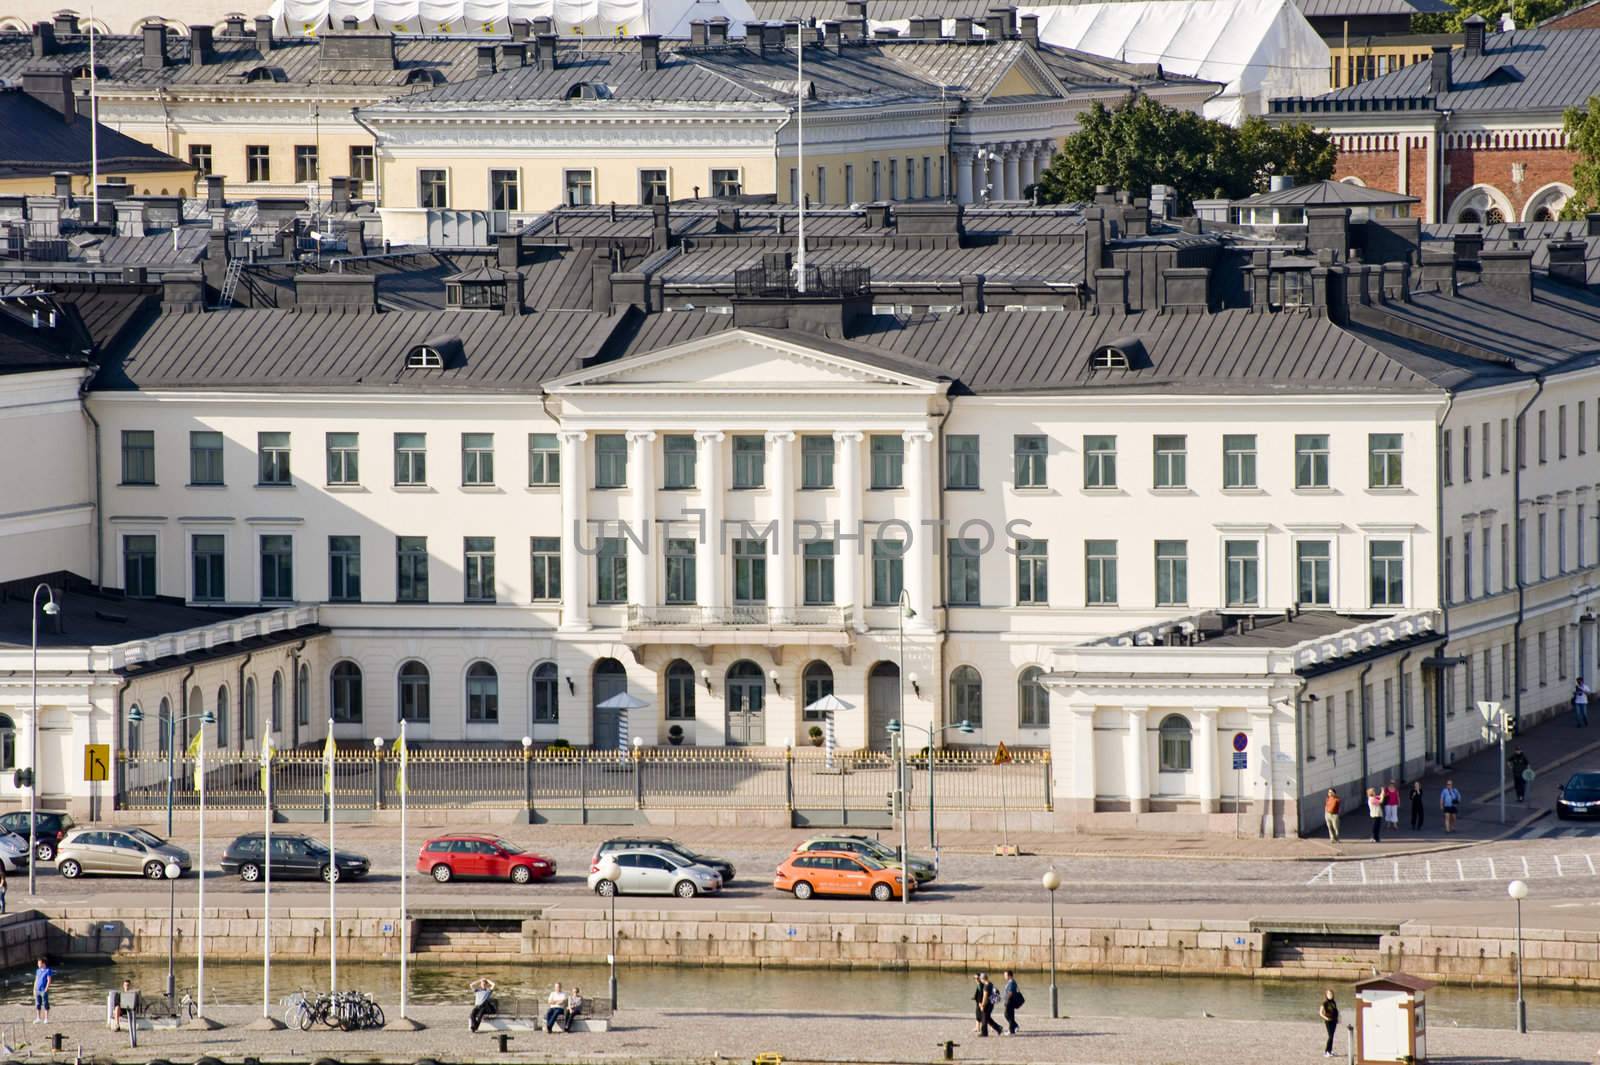 The Finland Presidential palace in Helsinki. Finland